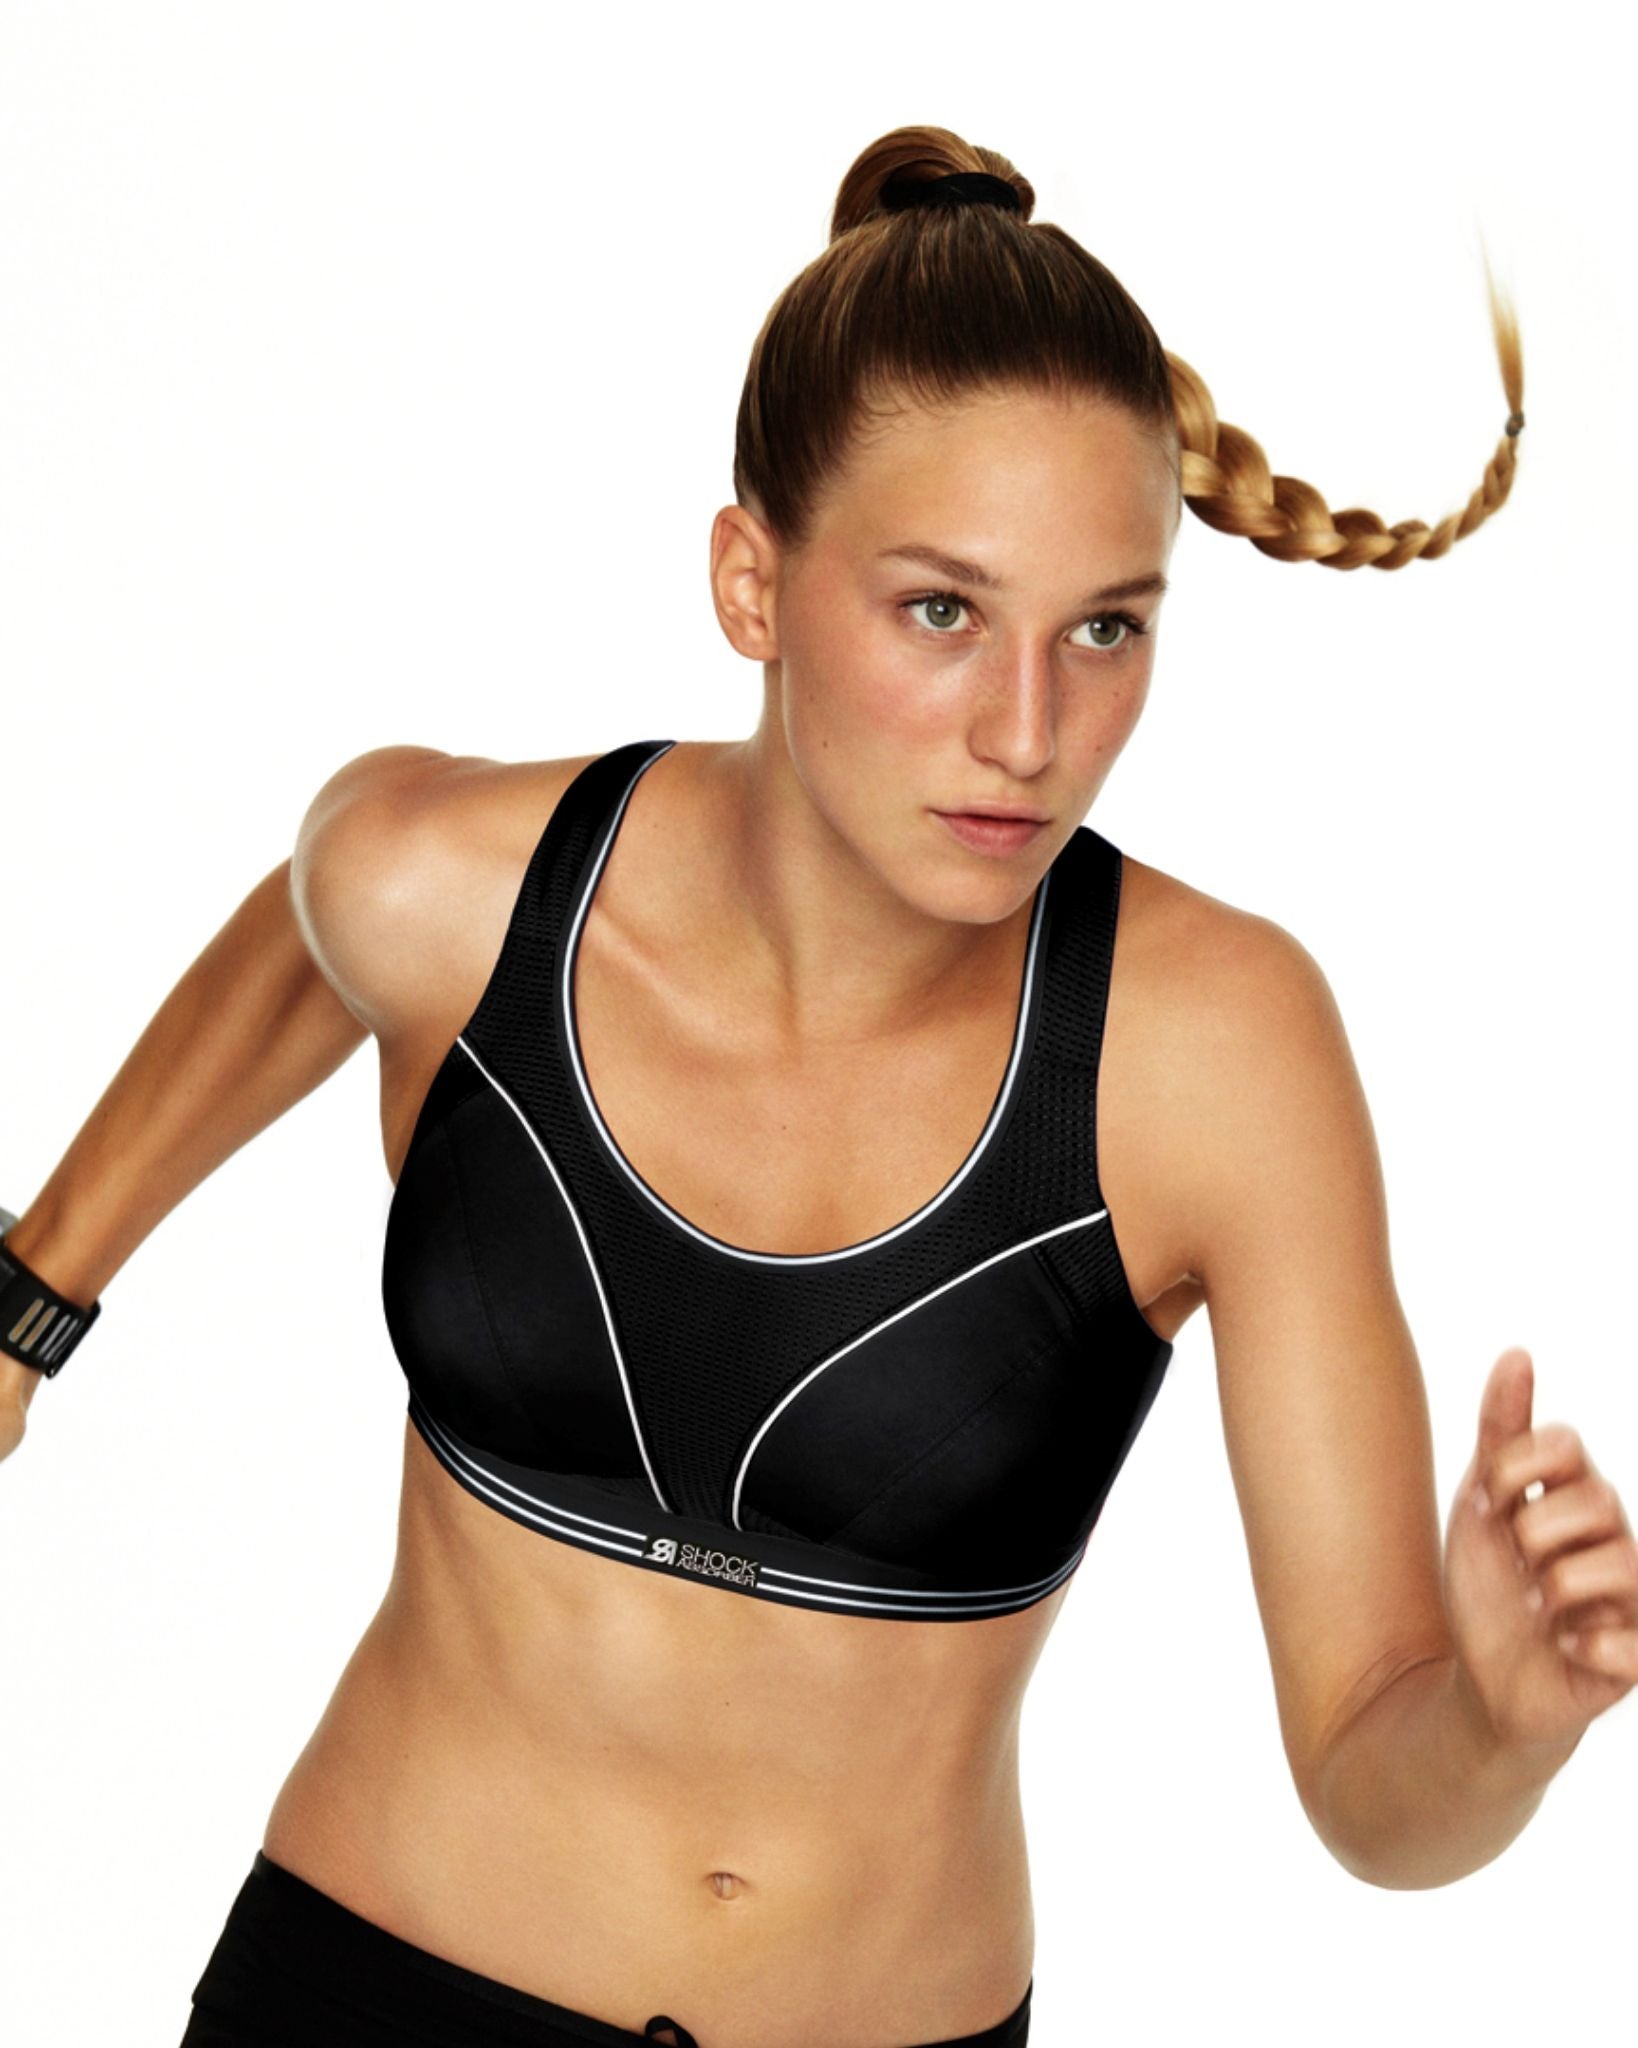 Buy Shock Absorber Black Ultimate Run Padded Non Wired Sports Bra